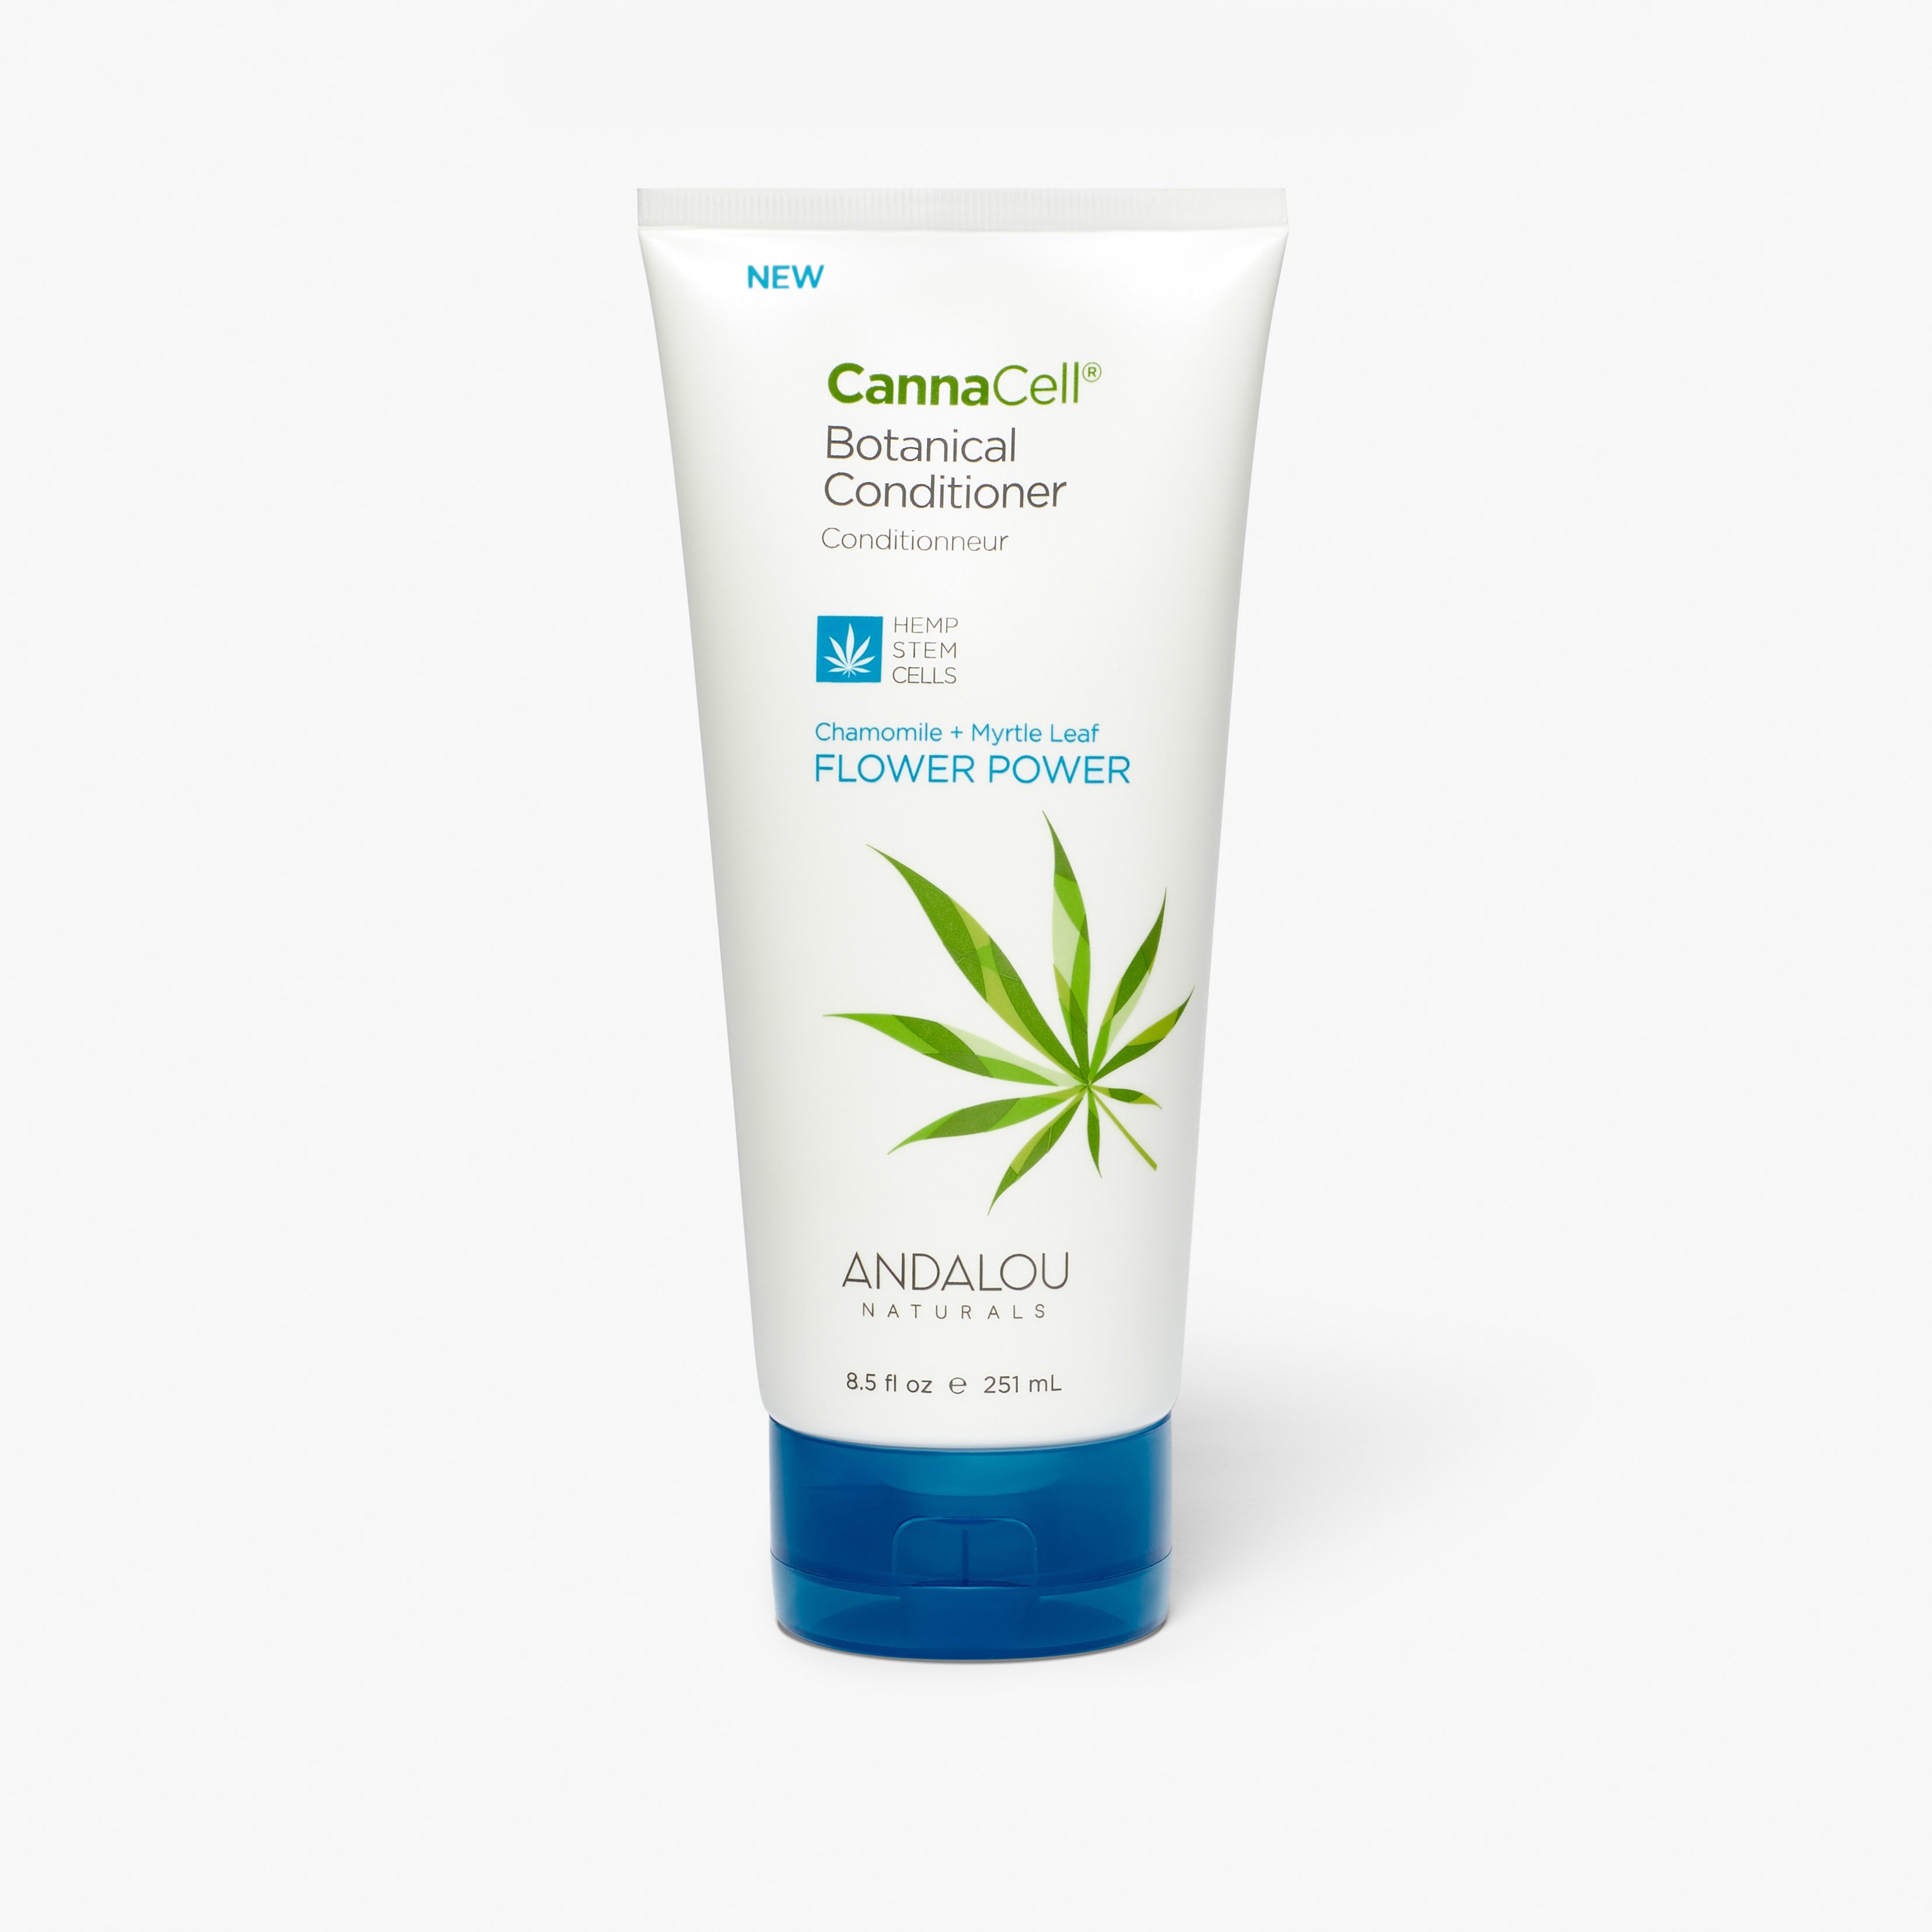 Image of CannaCell Botanical Conditioner - Flower Power